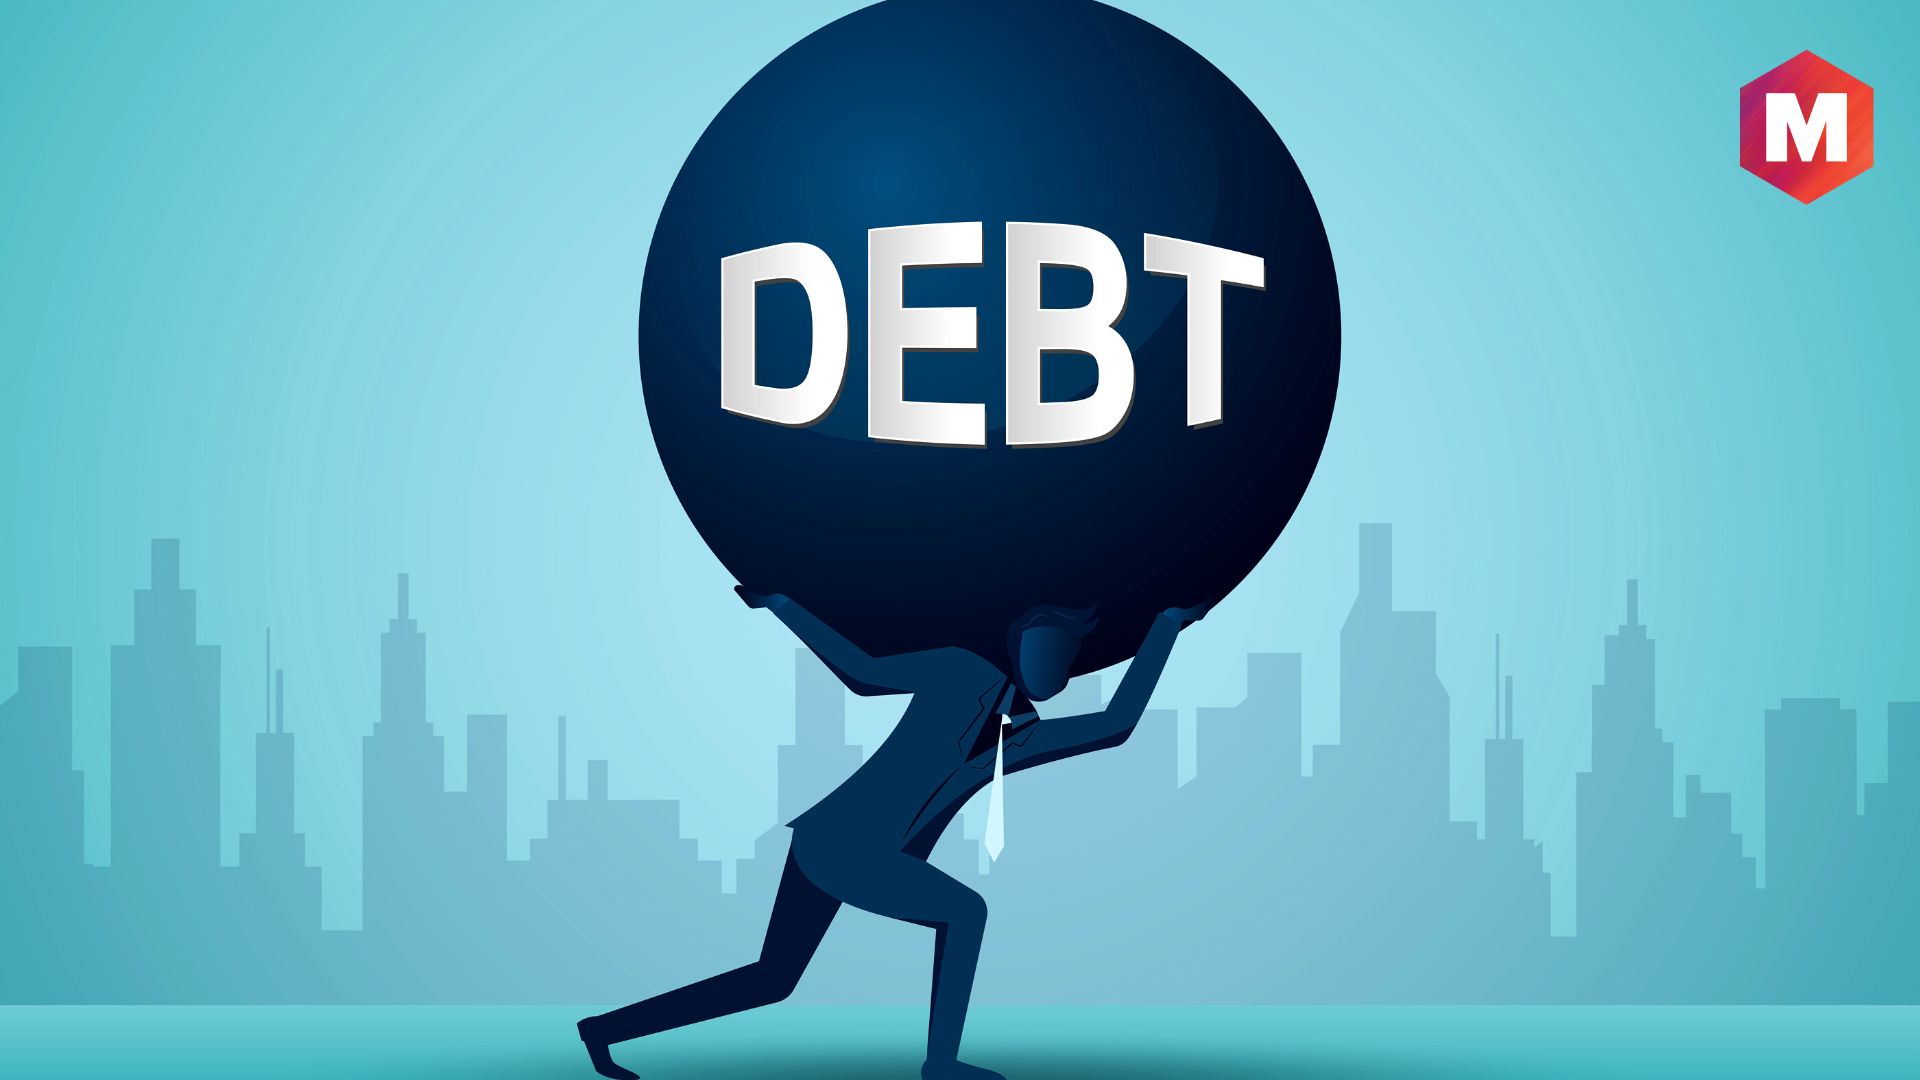 What Is Debt? Definition, Types, Pros And Cons